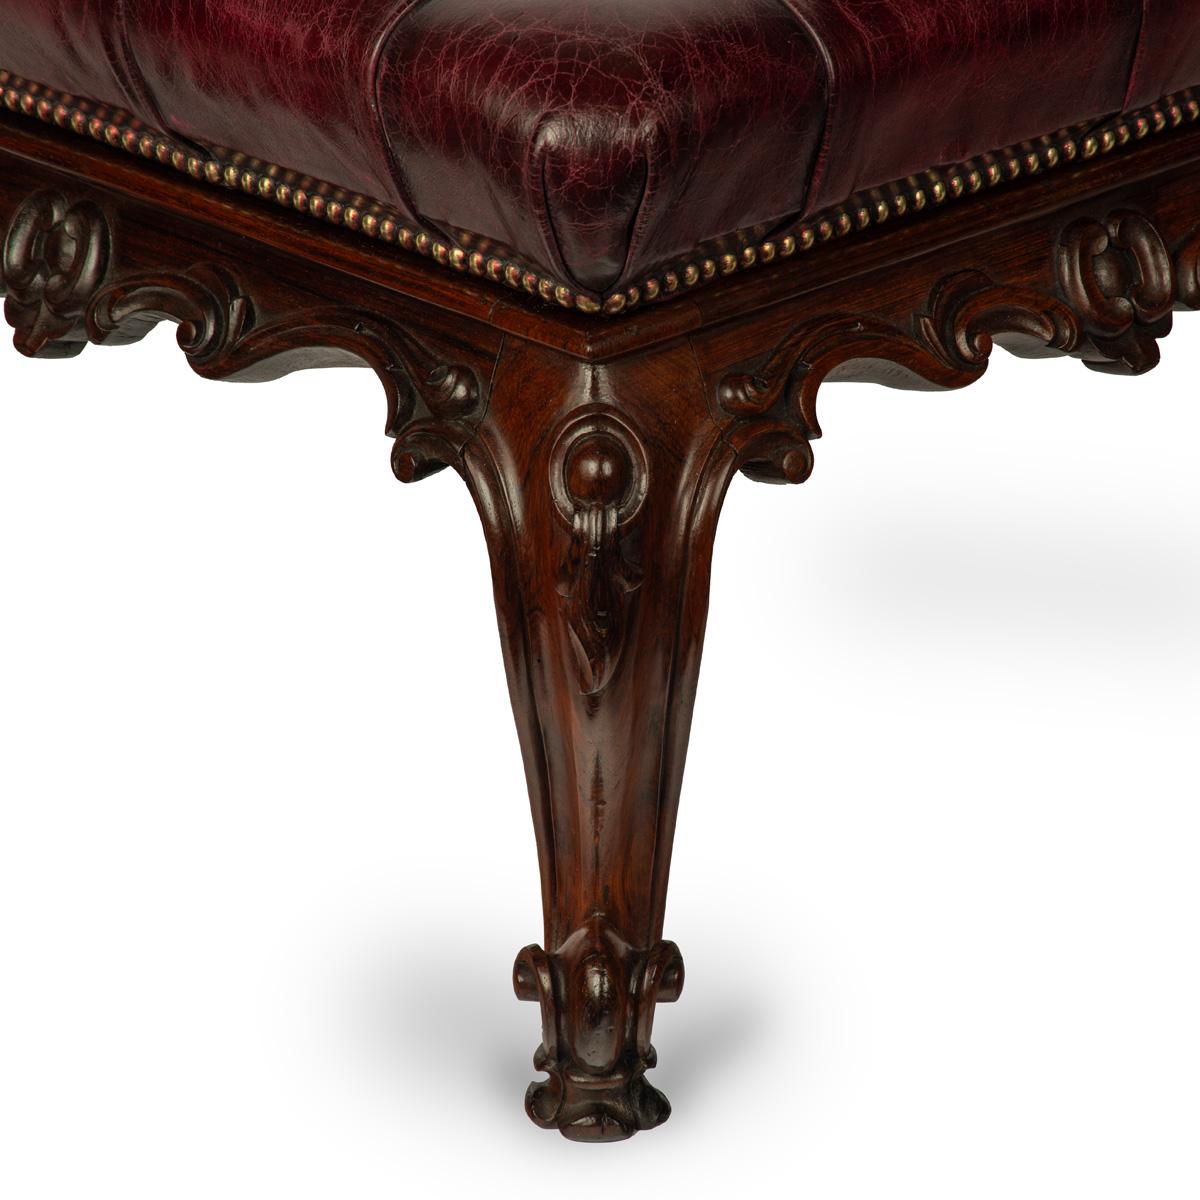 English An early Victorian leather-upholstered rosewood stool